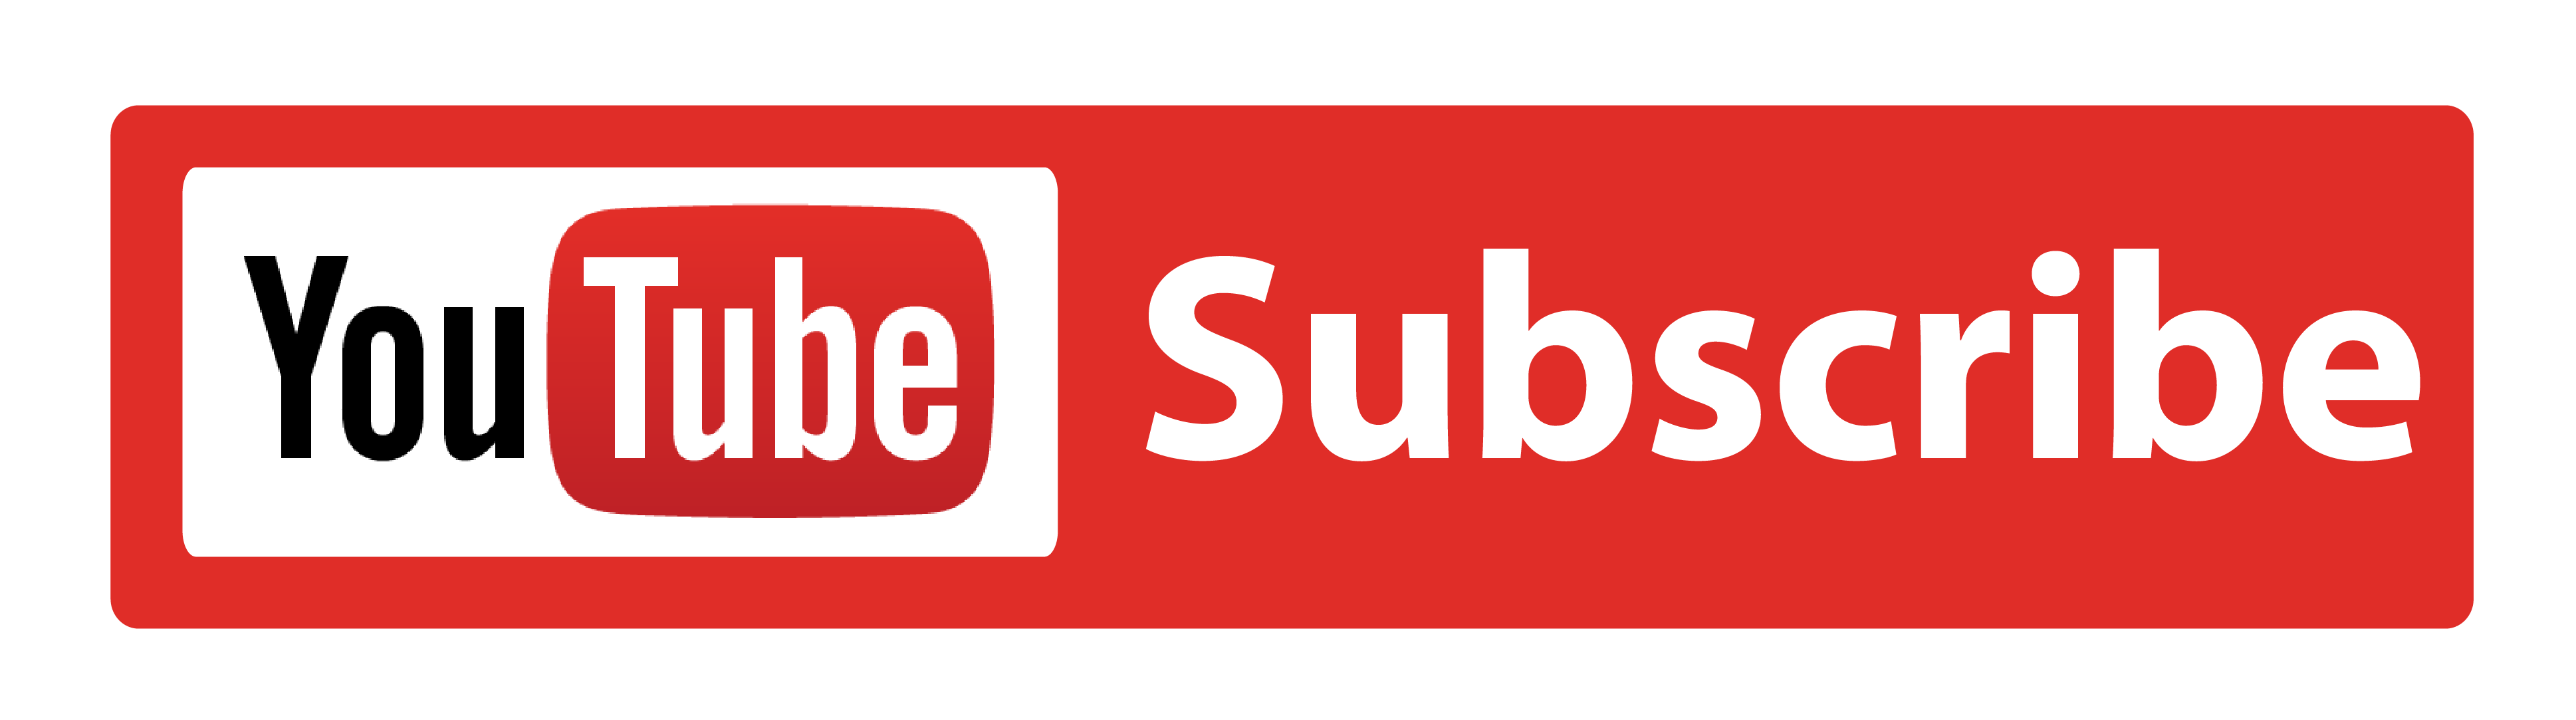 Subscribe Png Subscribe Buttons Youtube Subscribes Free Transparent Png Logos